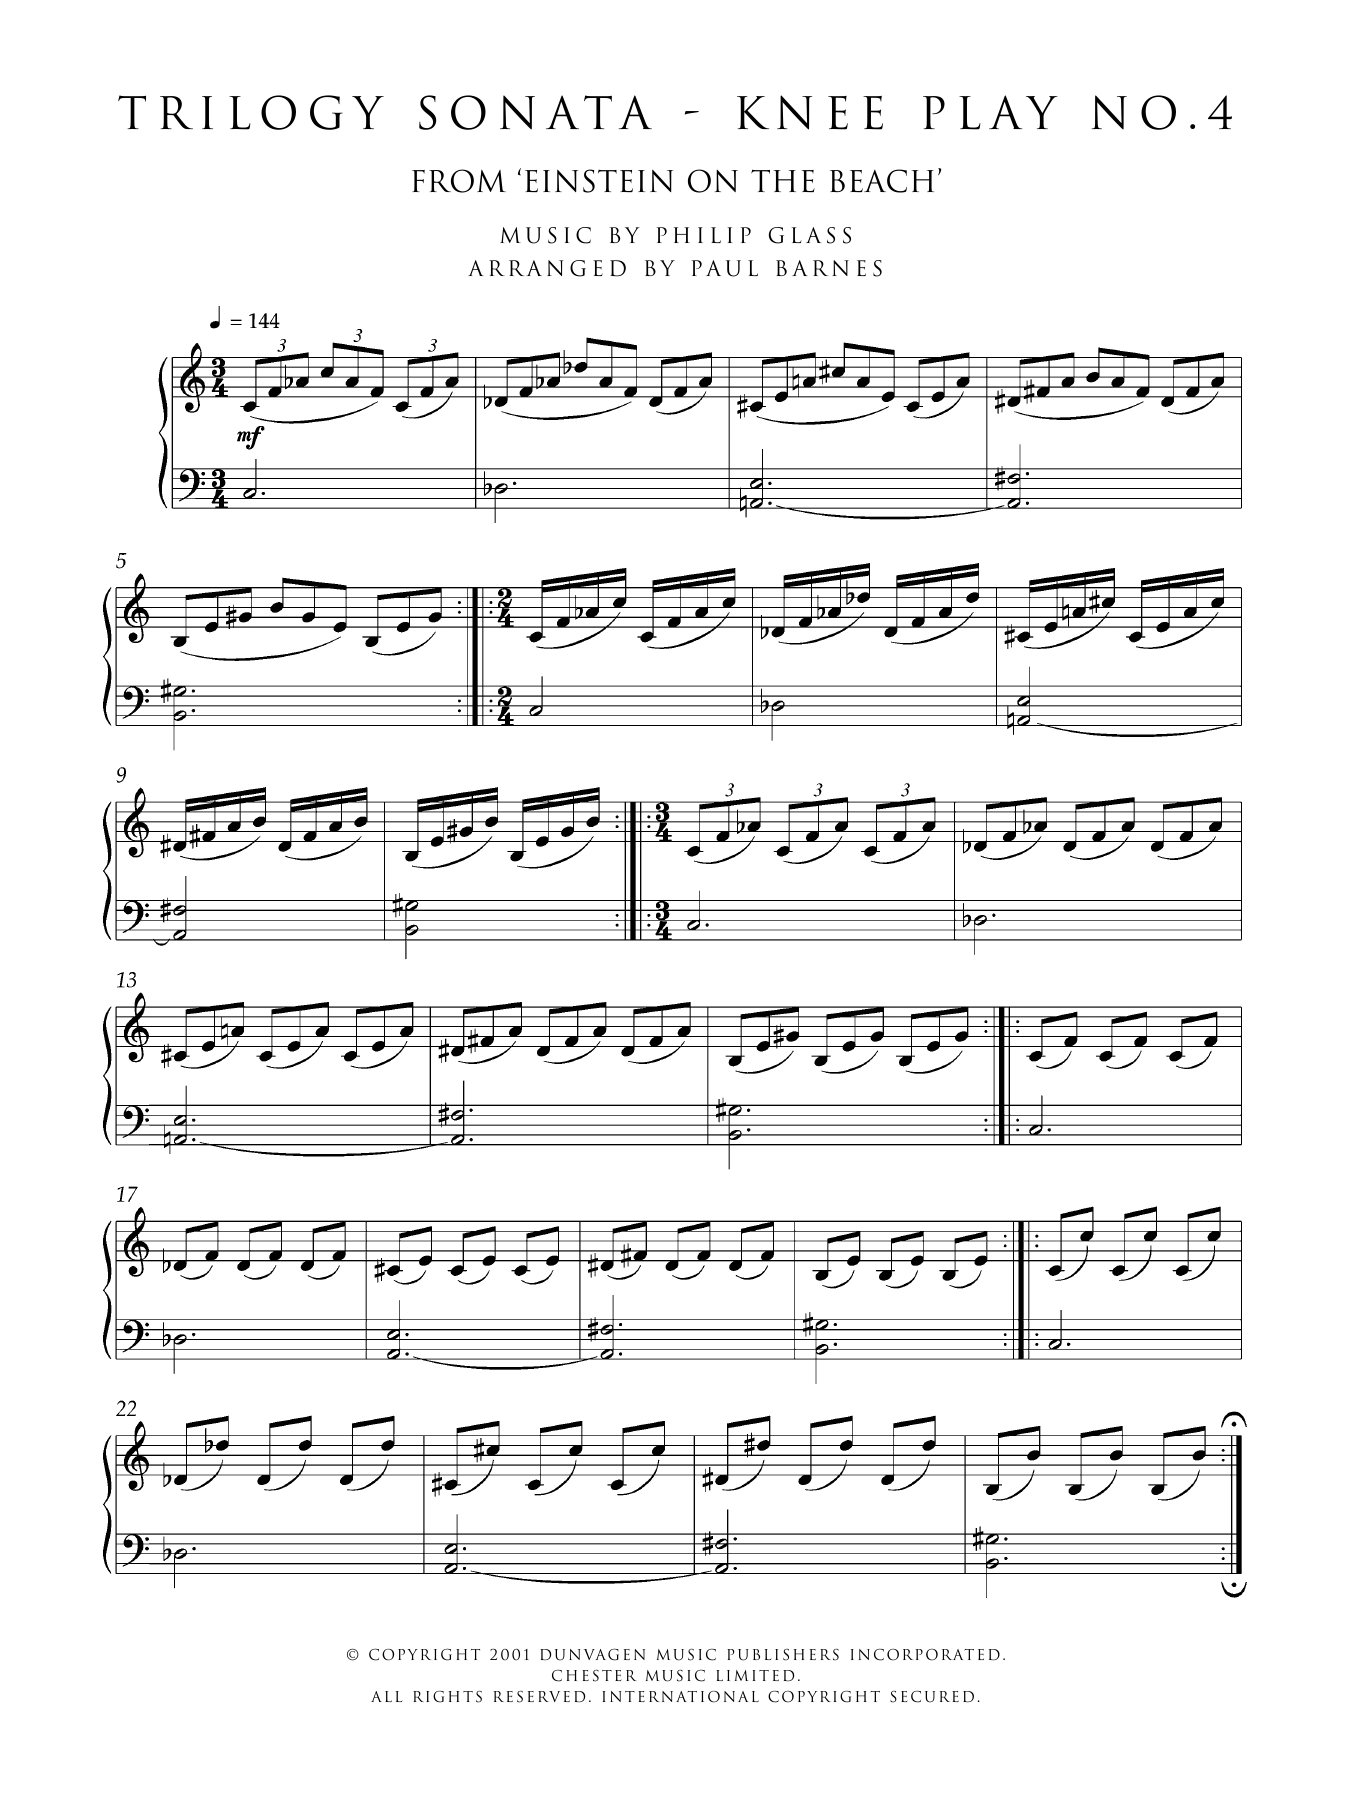 Download Philip Glass Trilogy Sonata - Knee Play No. 4 (from Sheet Music